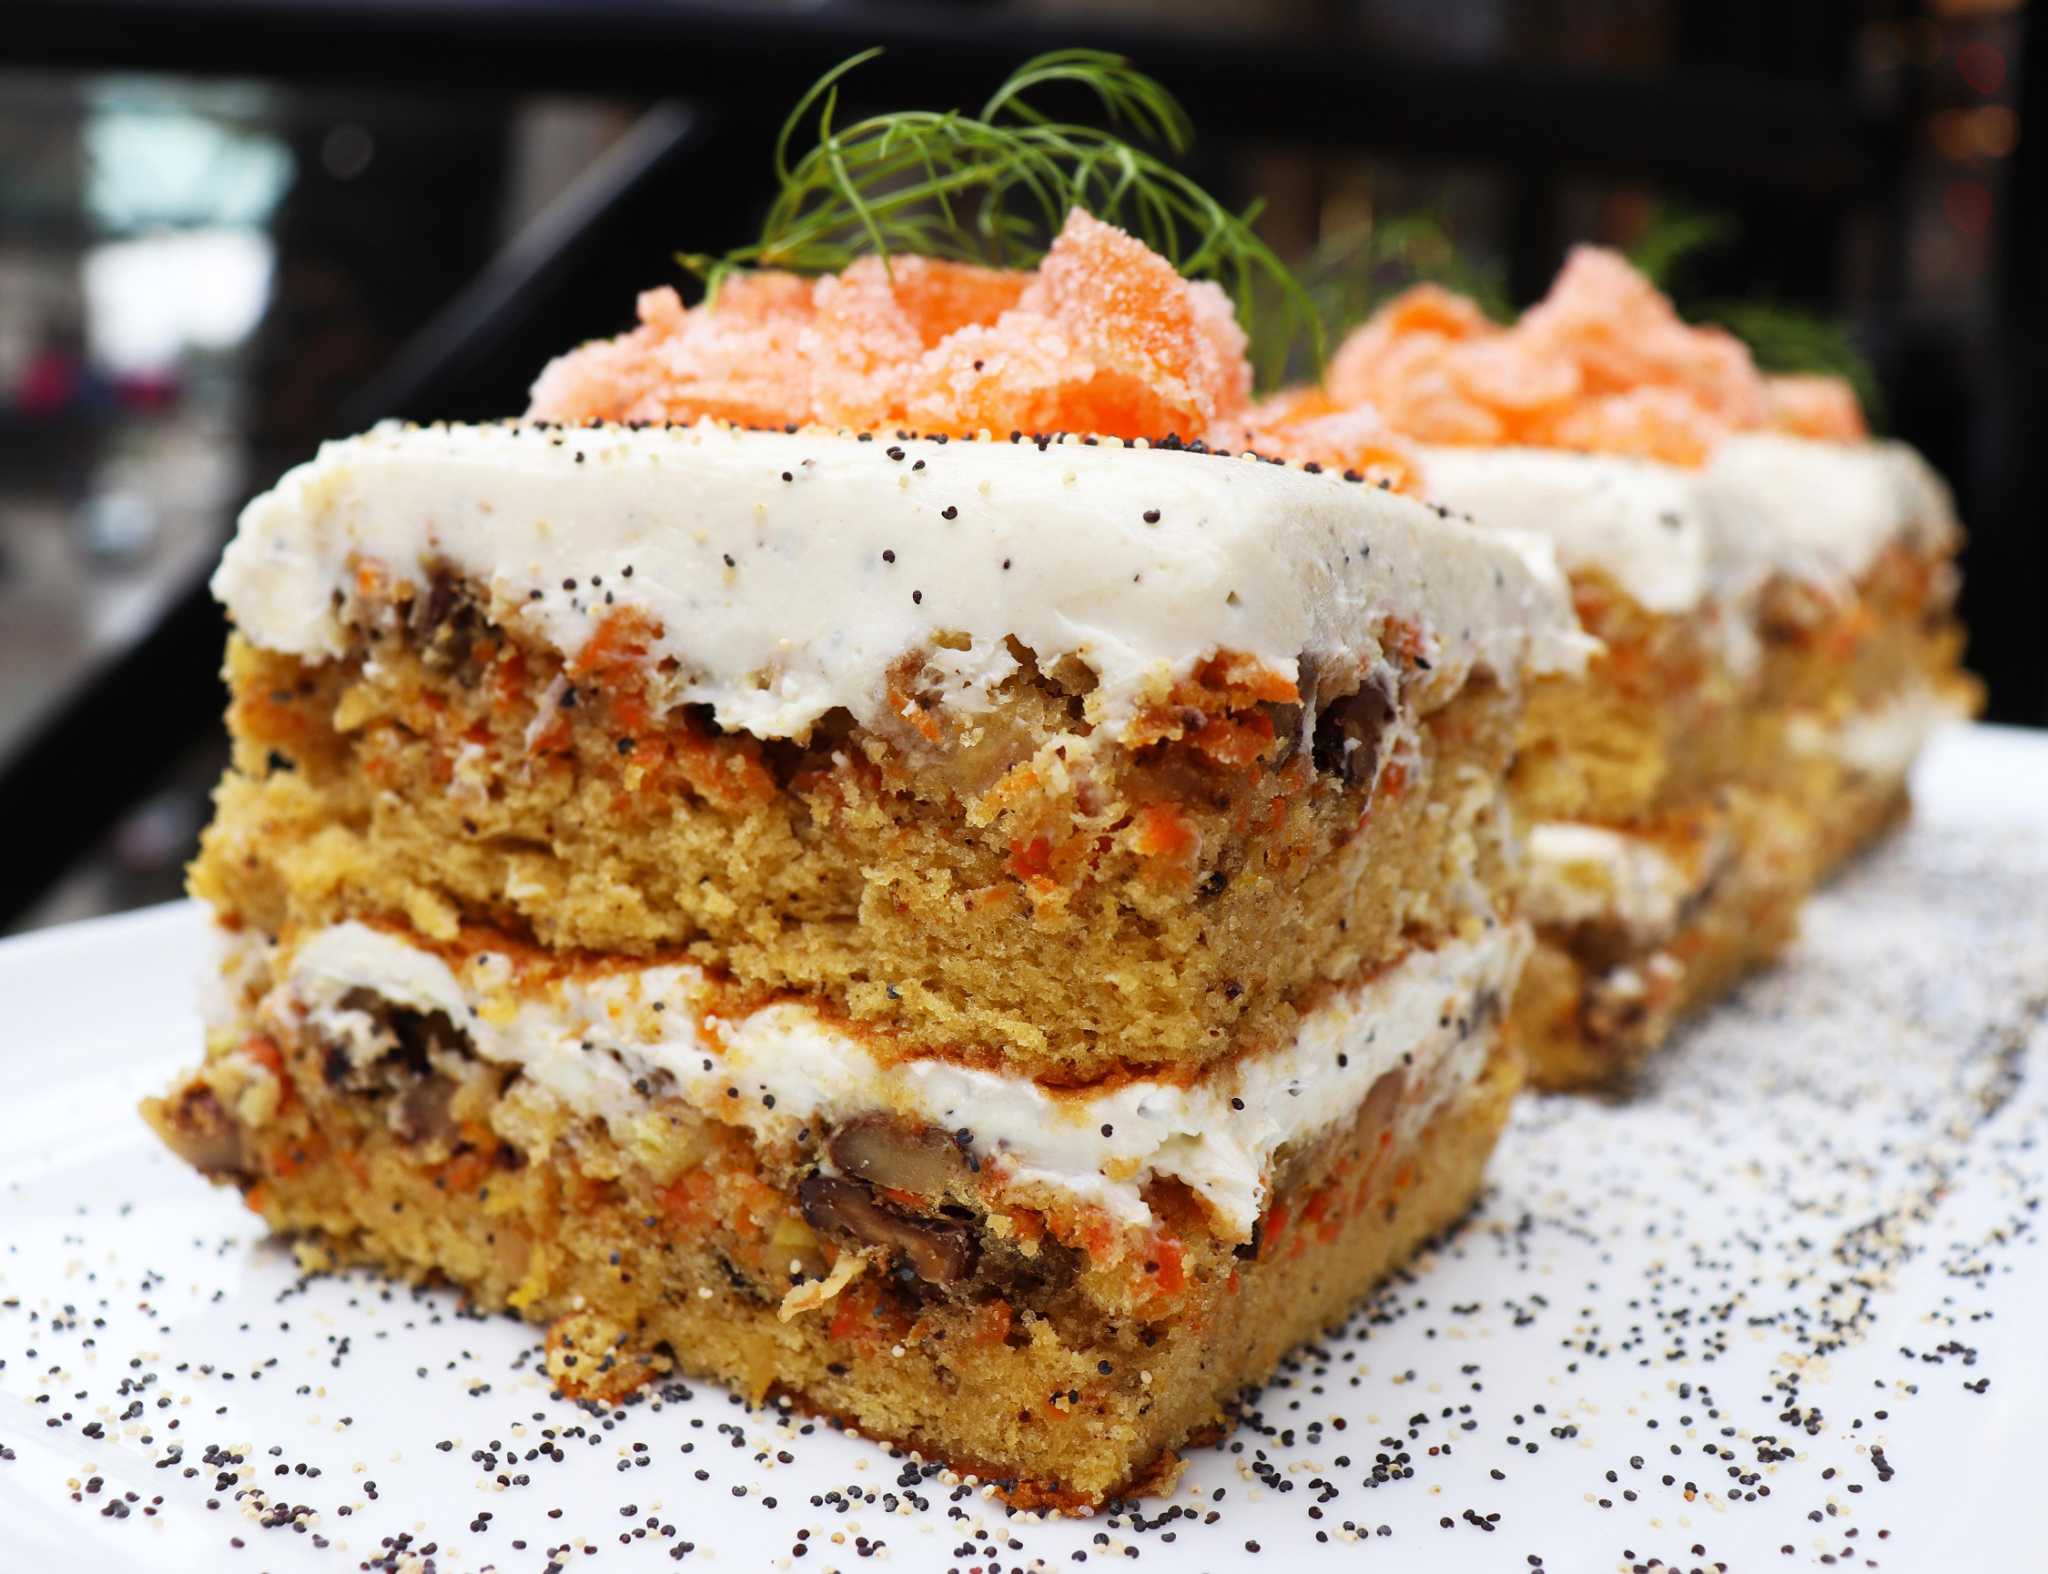 Top 100 Restaurants ** Killen's BBQ's Carrot Cake. Photographed... News  Photo - Getty Images